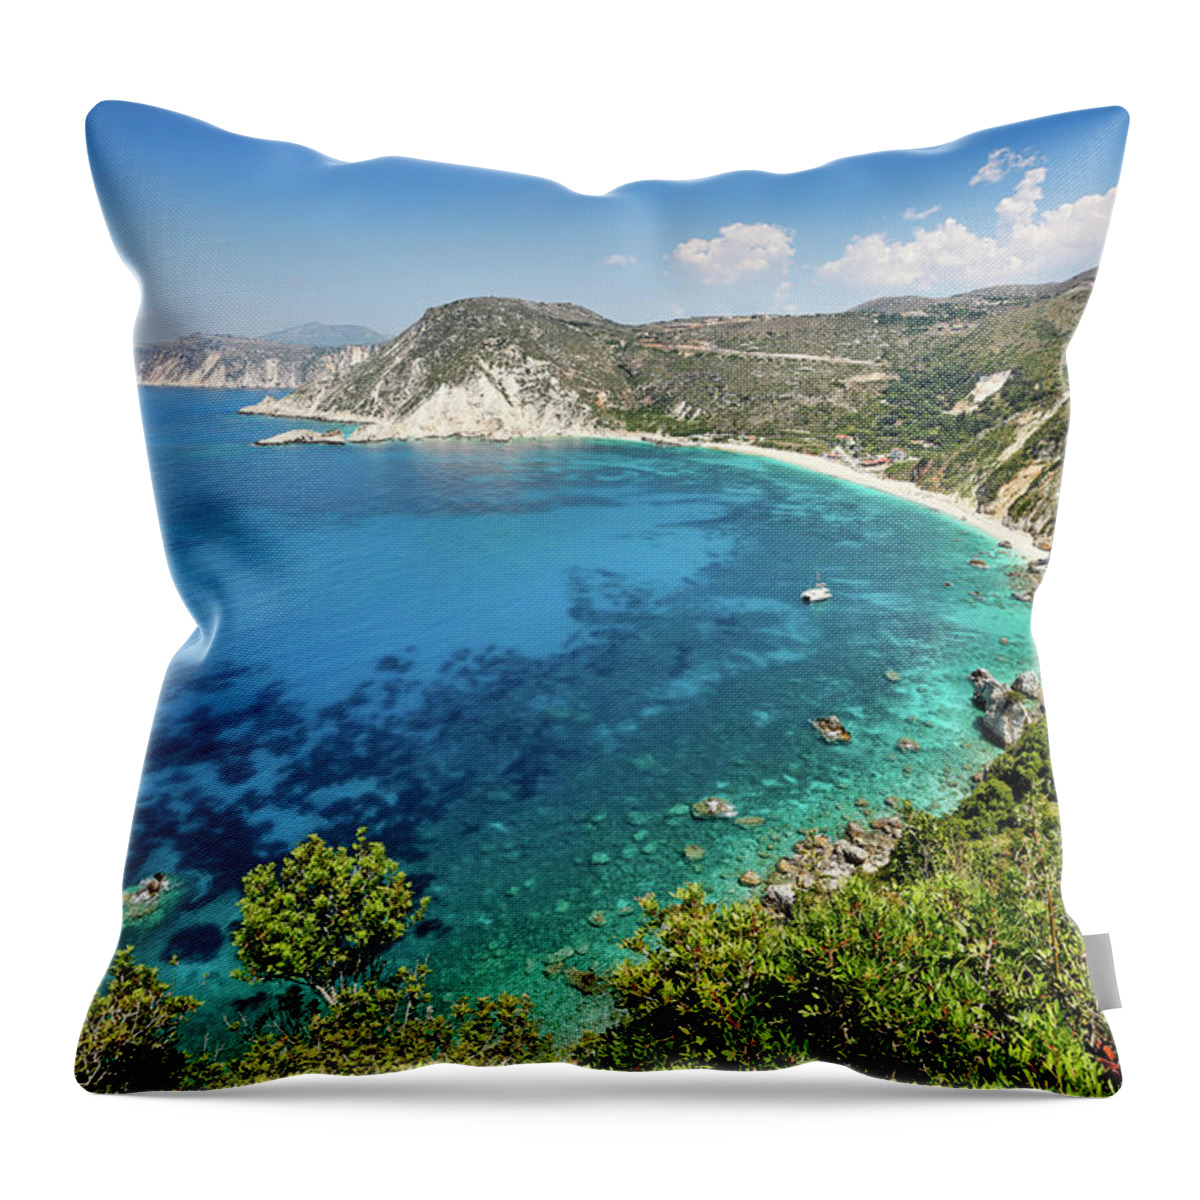 Petani Throw Pillow featuring the photograph Petani beach in Kefalonia, Greece by Constantinos Iliopoulos